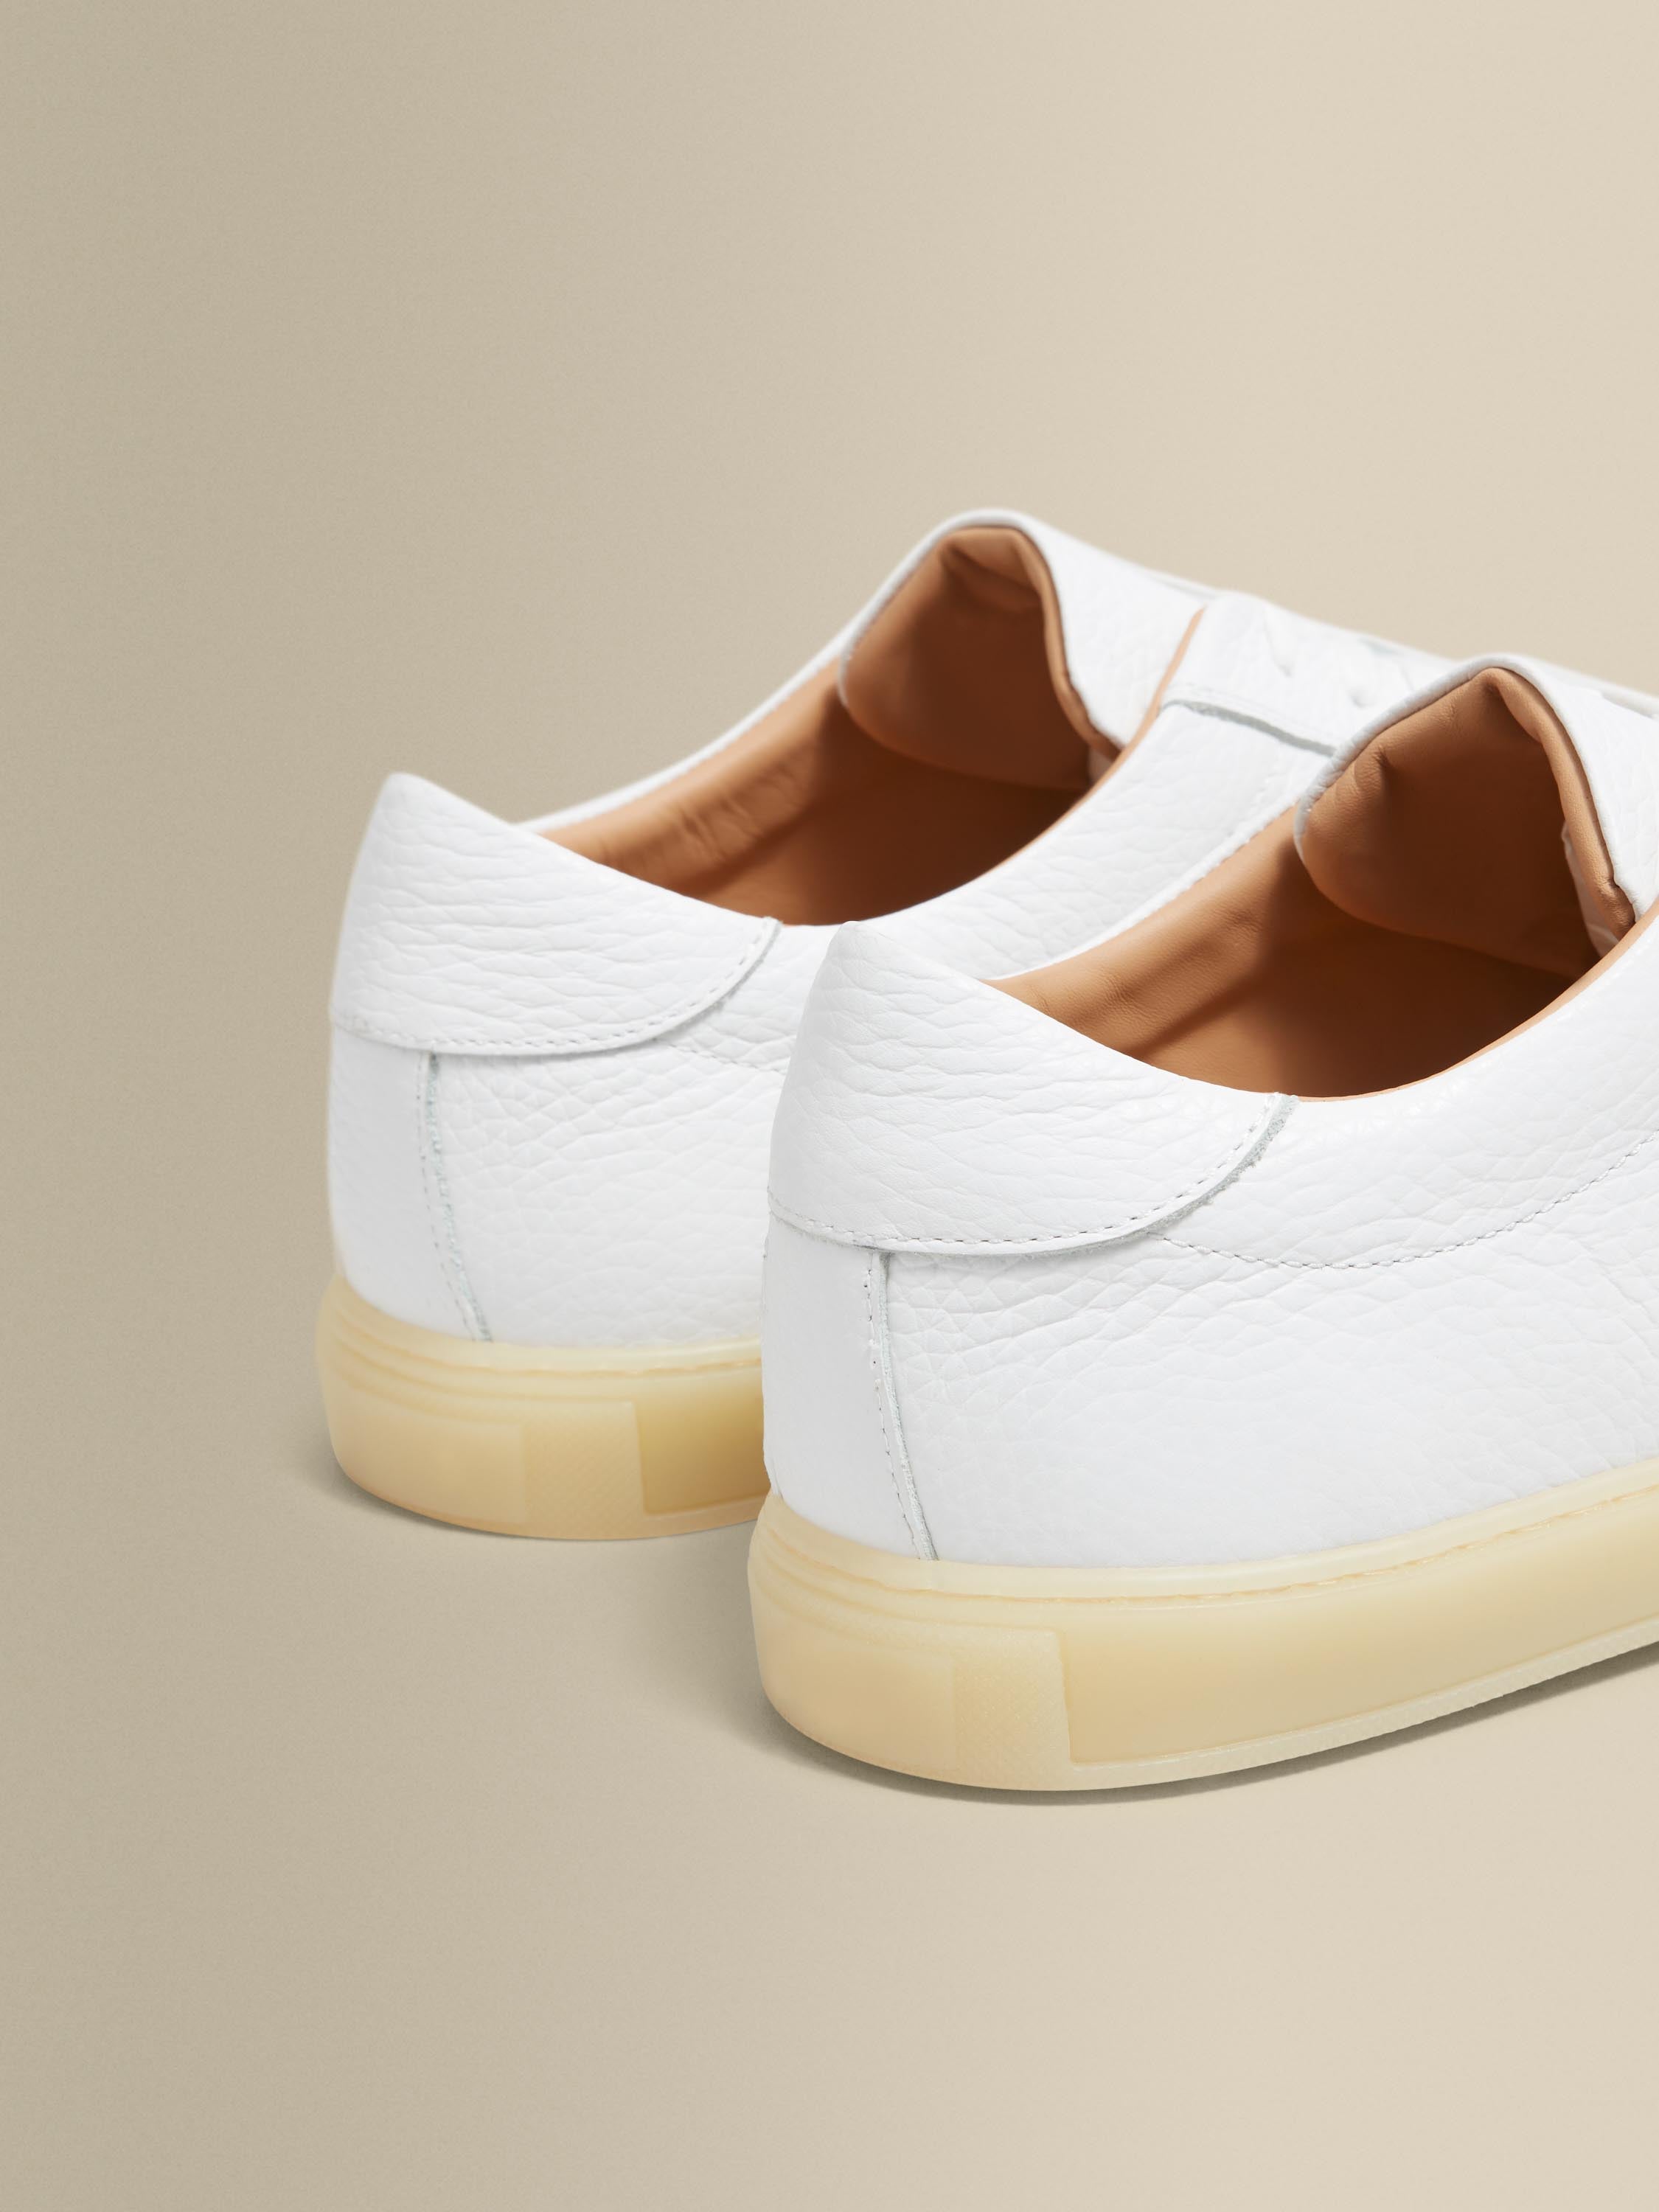 Leather Sneakers With Gum Sole Heel Product Image